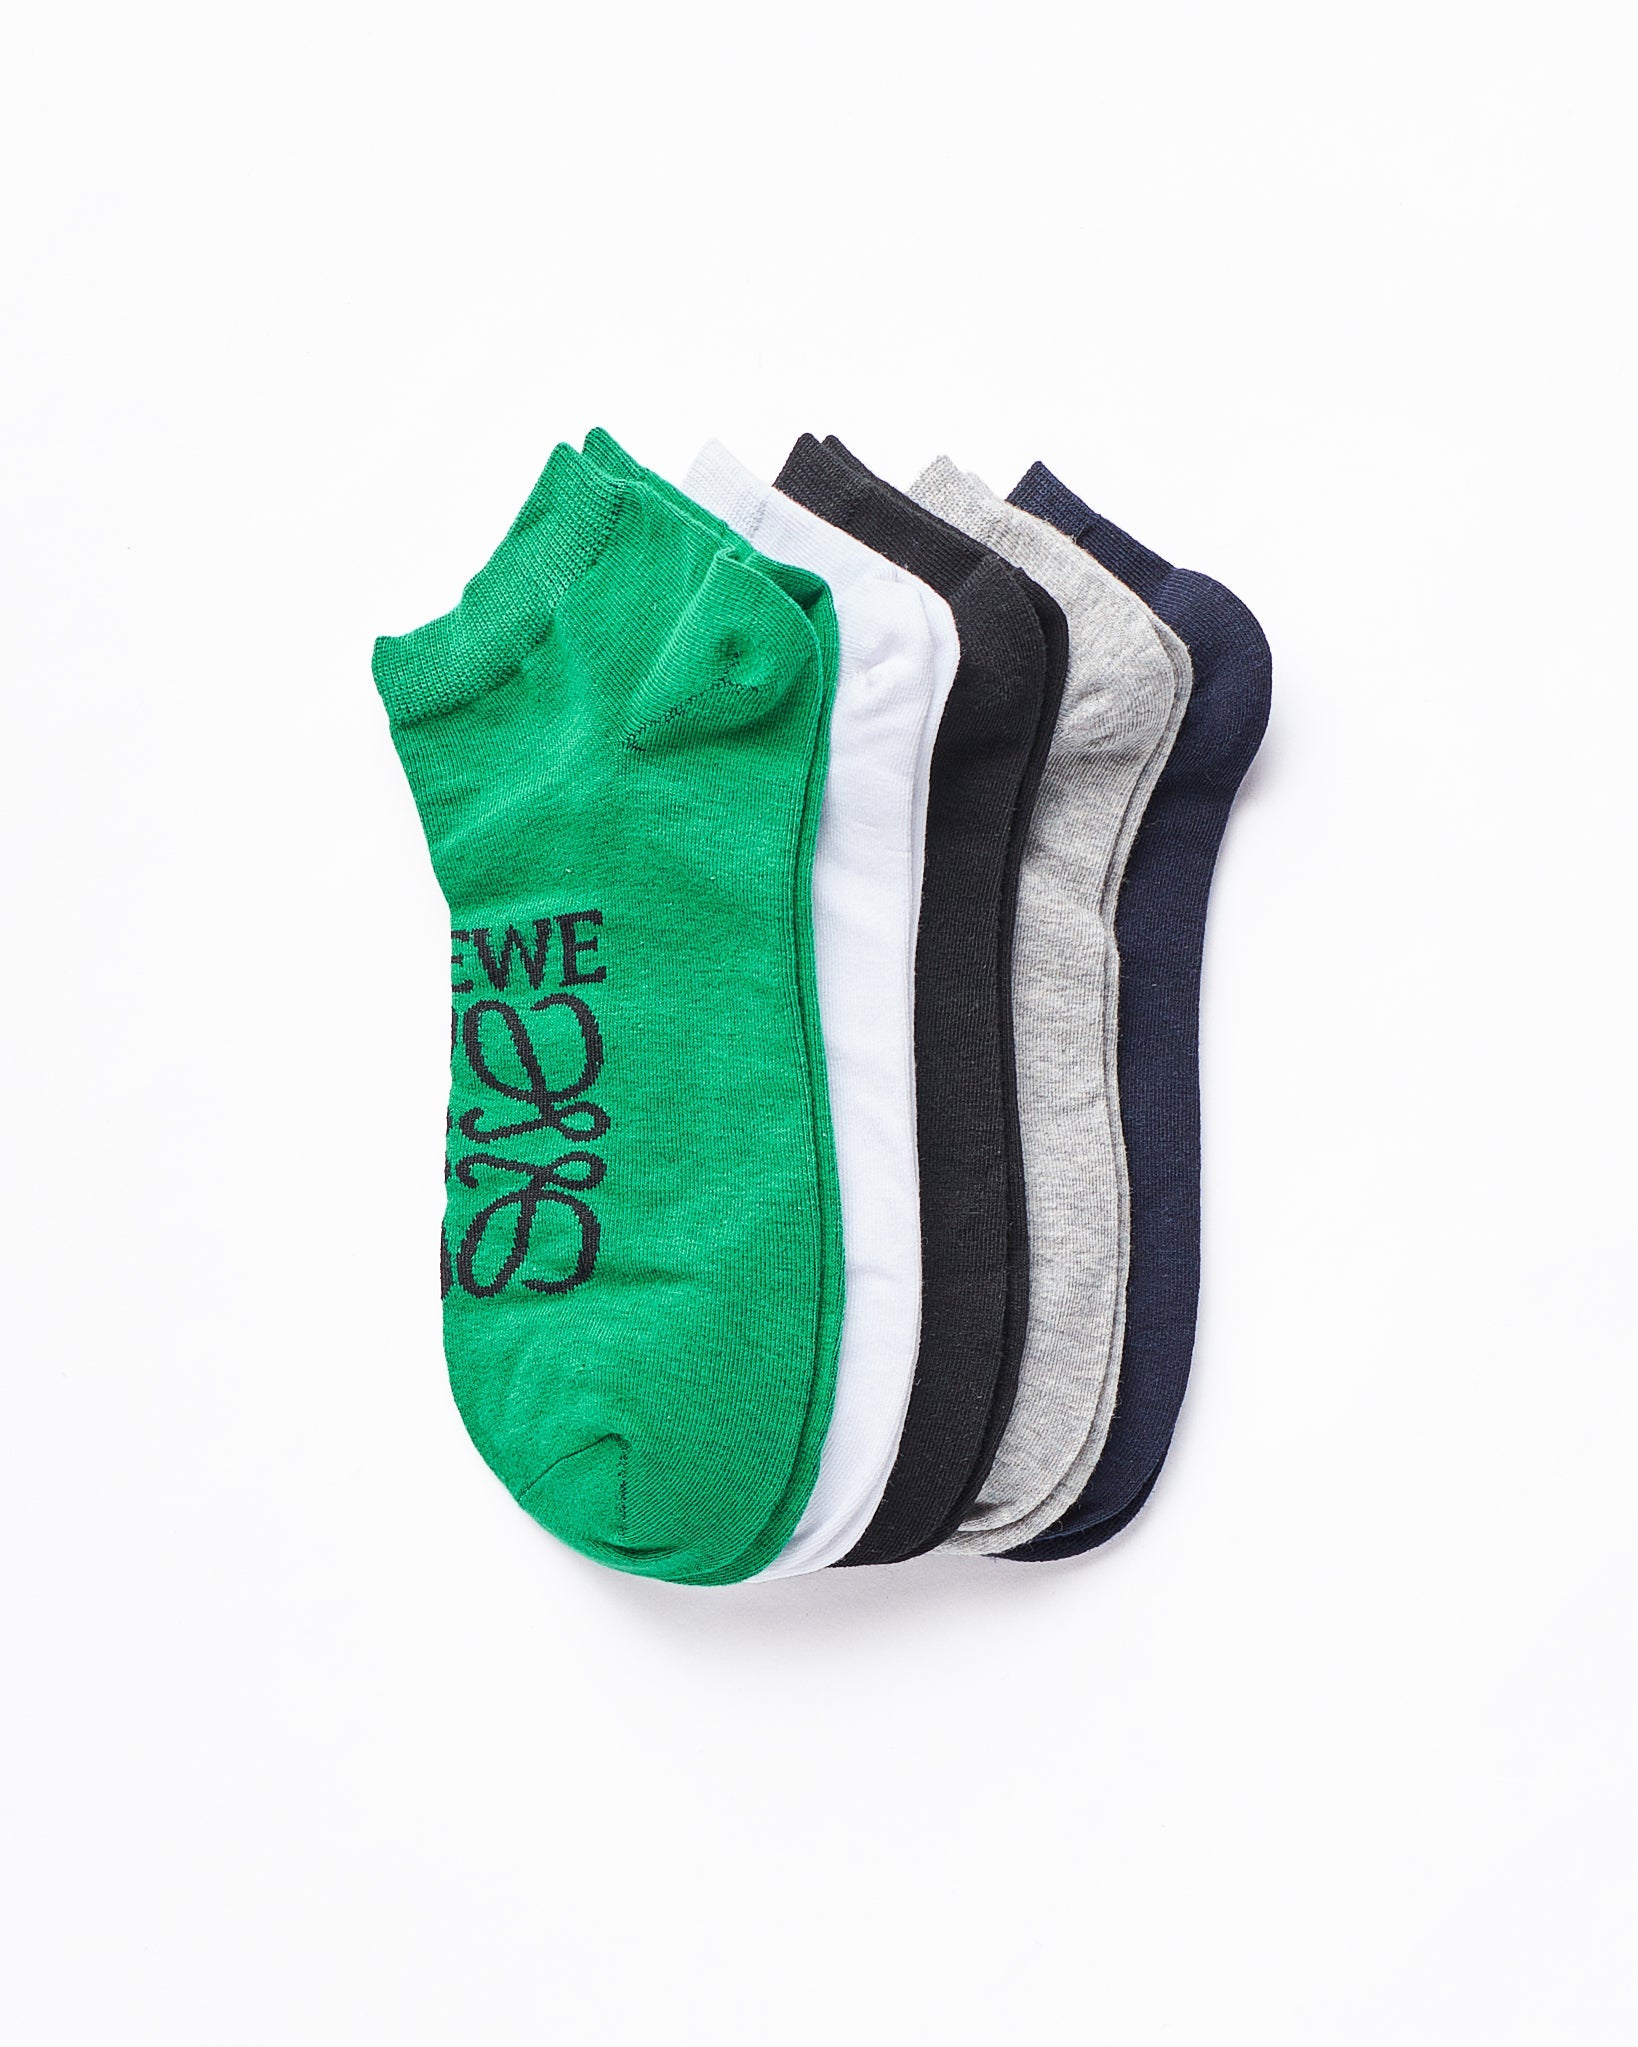 MOI OUTFIT-Instep Logo Printed 5 Pairs Ankle Socks 12.90